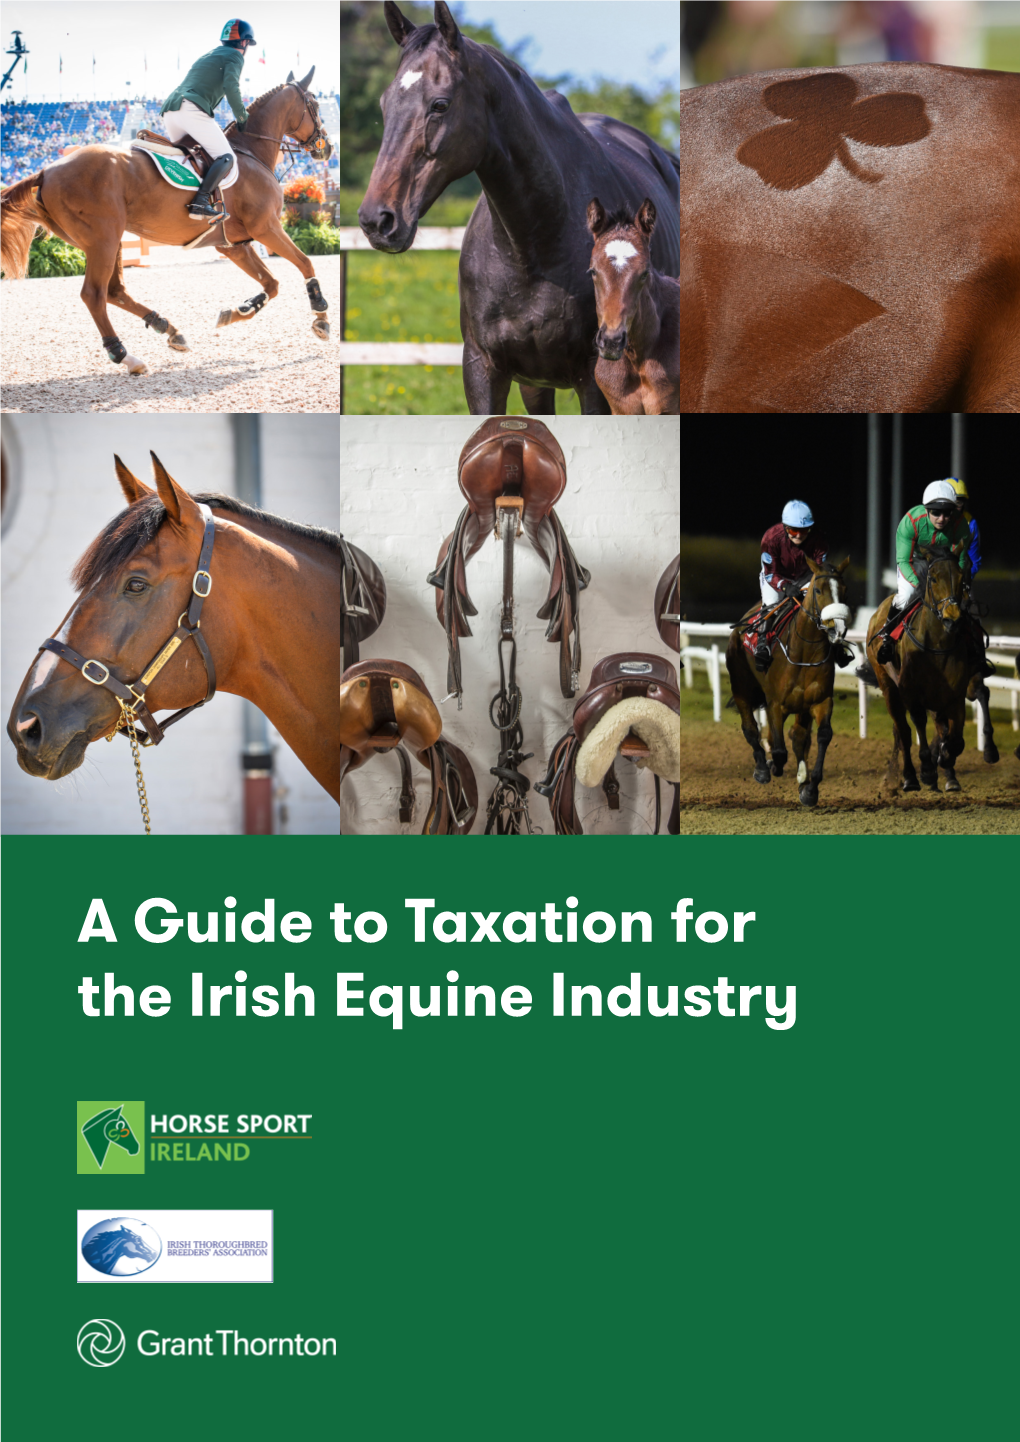 A Guide to Taxation for the Irish Equine Industry